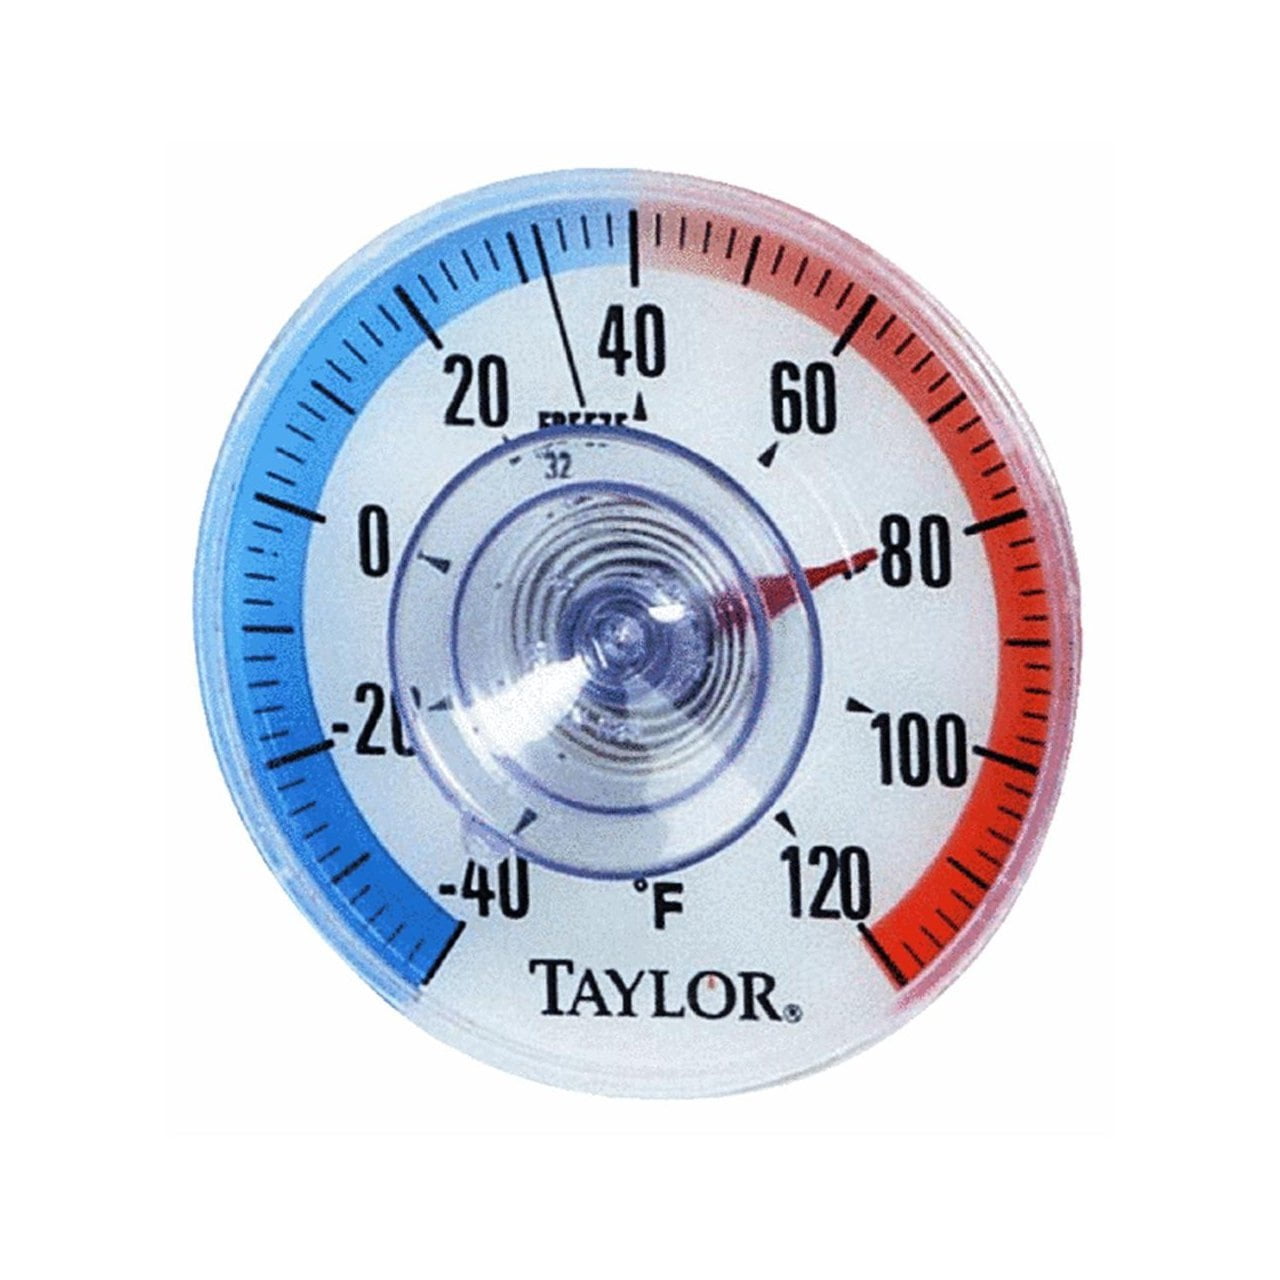 Taylor Dial Thermometer Plastic White